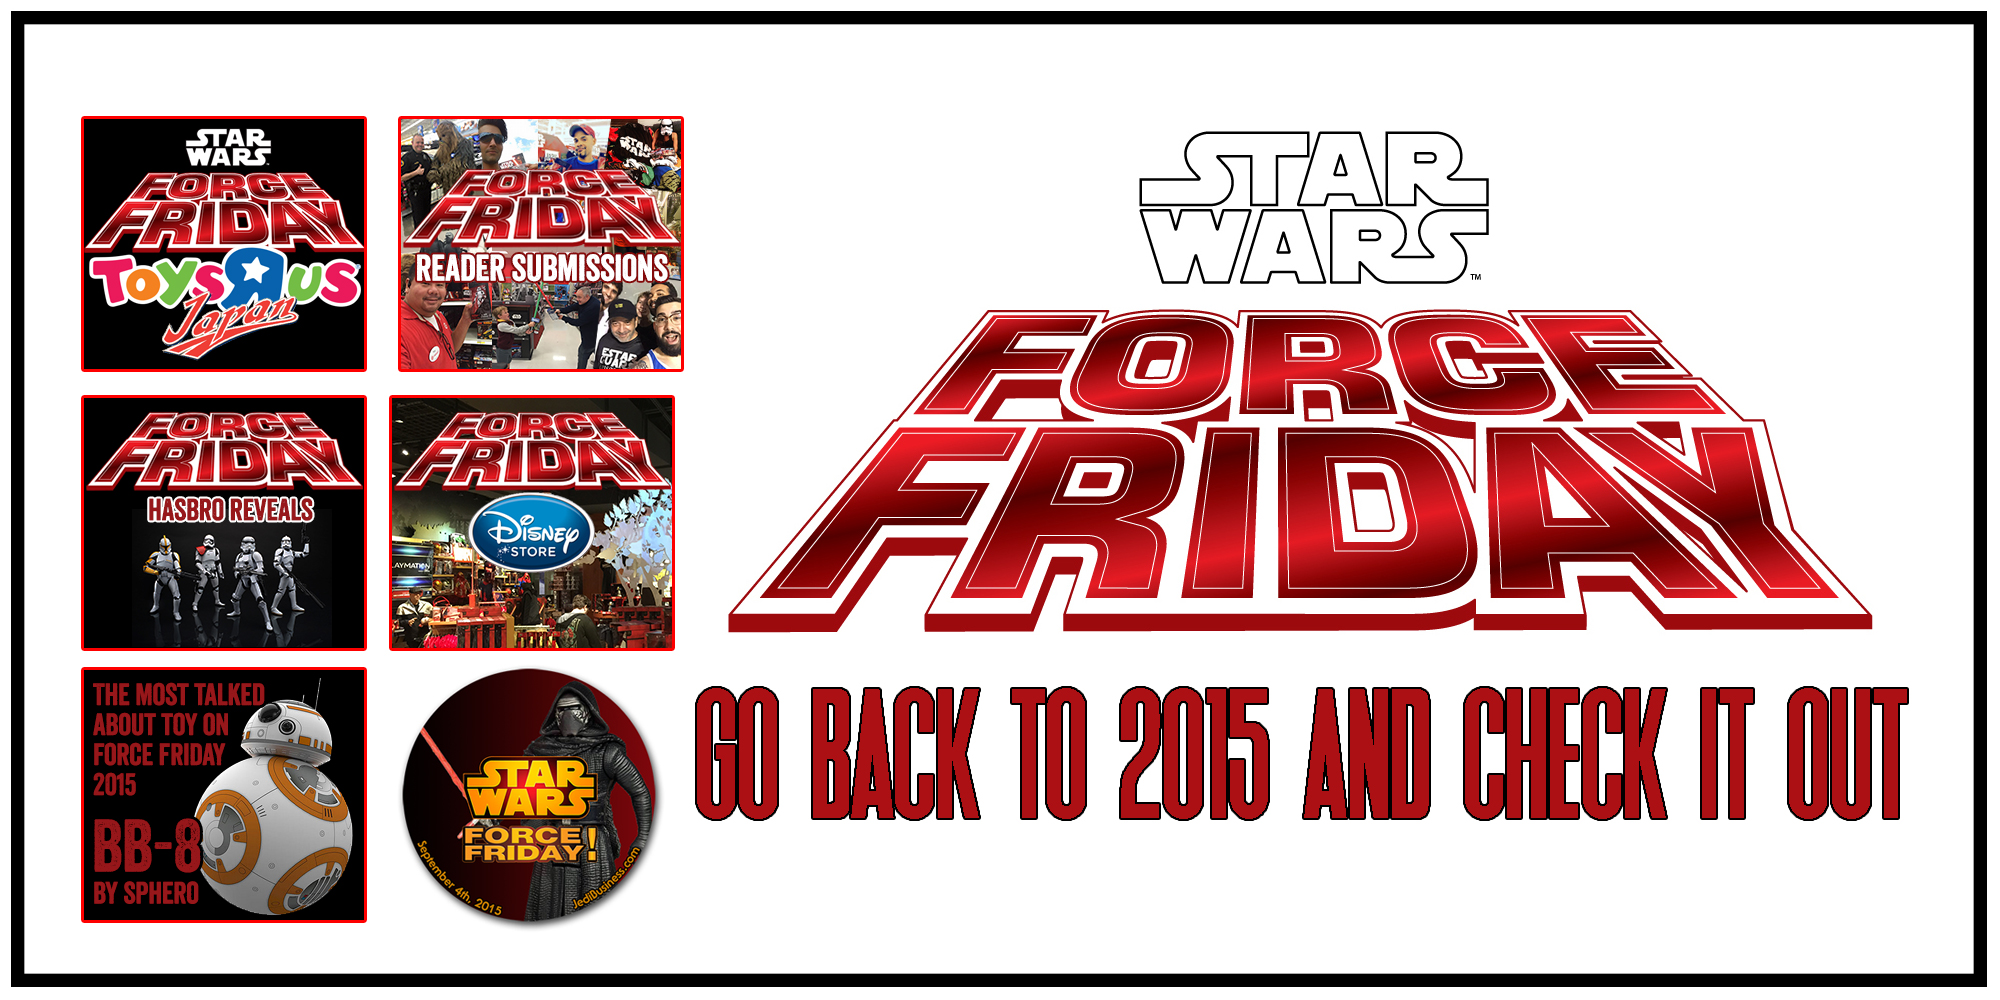 4 Years Ago Today! Check Out Our Force Friday 2015 Coverage!